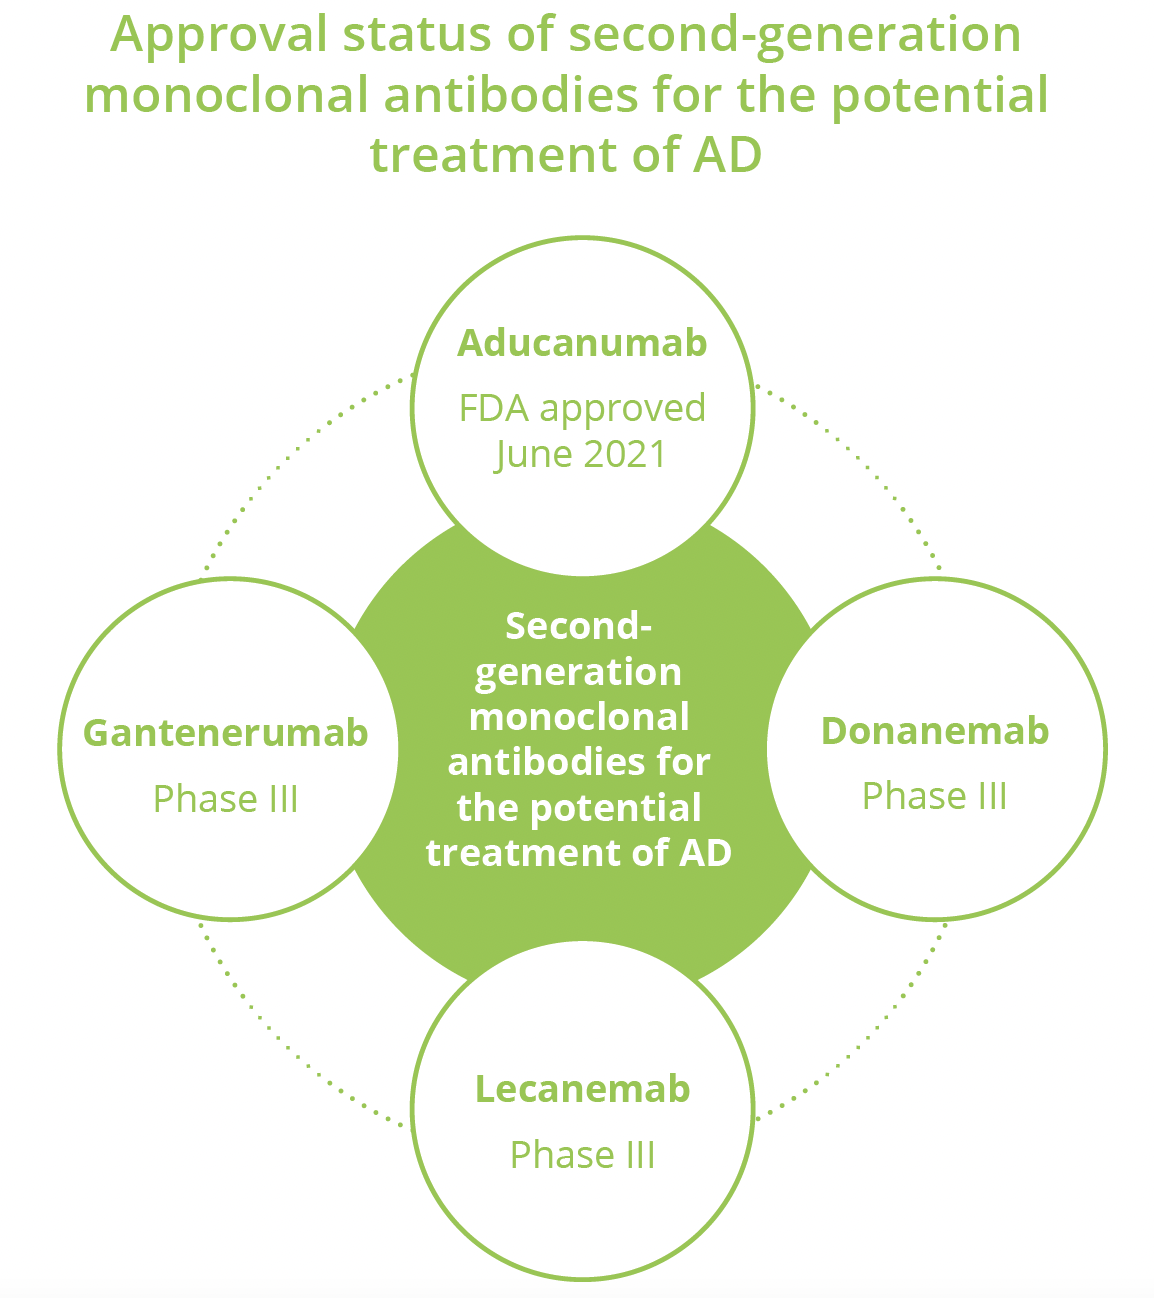 Aducanumab was approved in June 2021 and donanemab, gantenerumab and lecanemab are in phase 3.